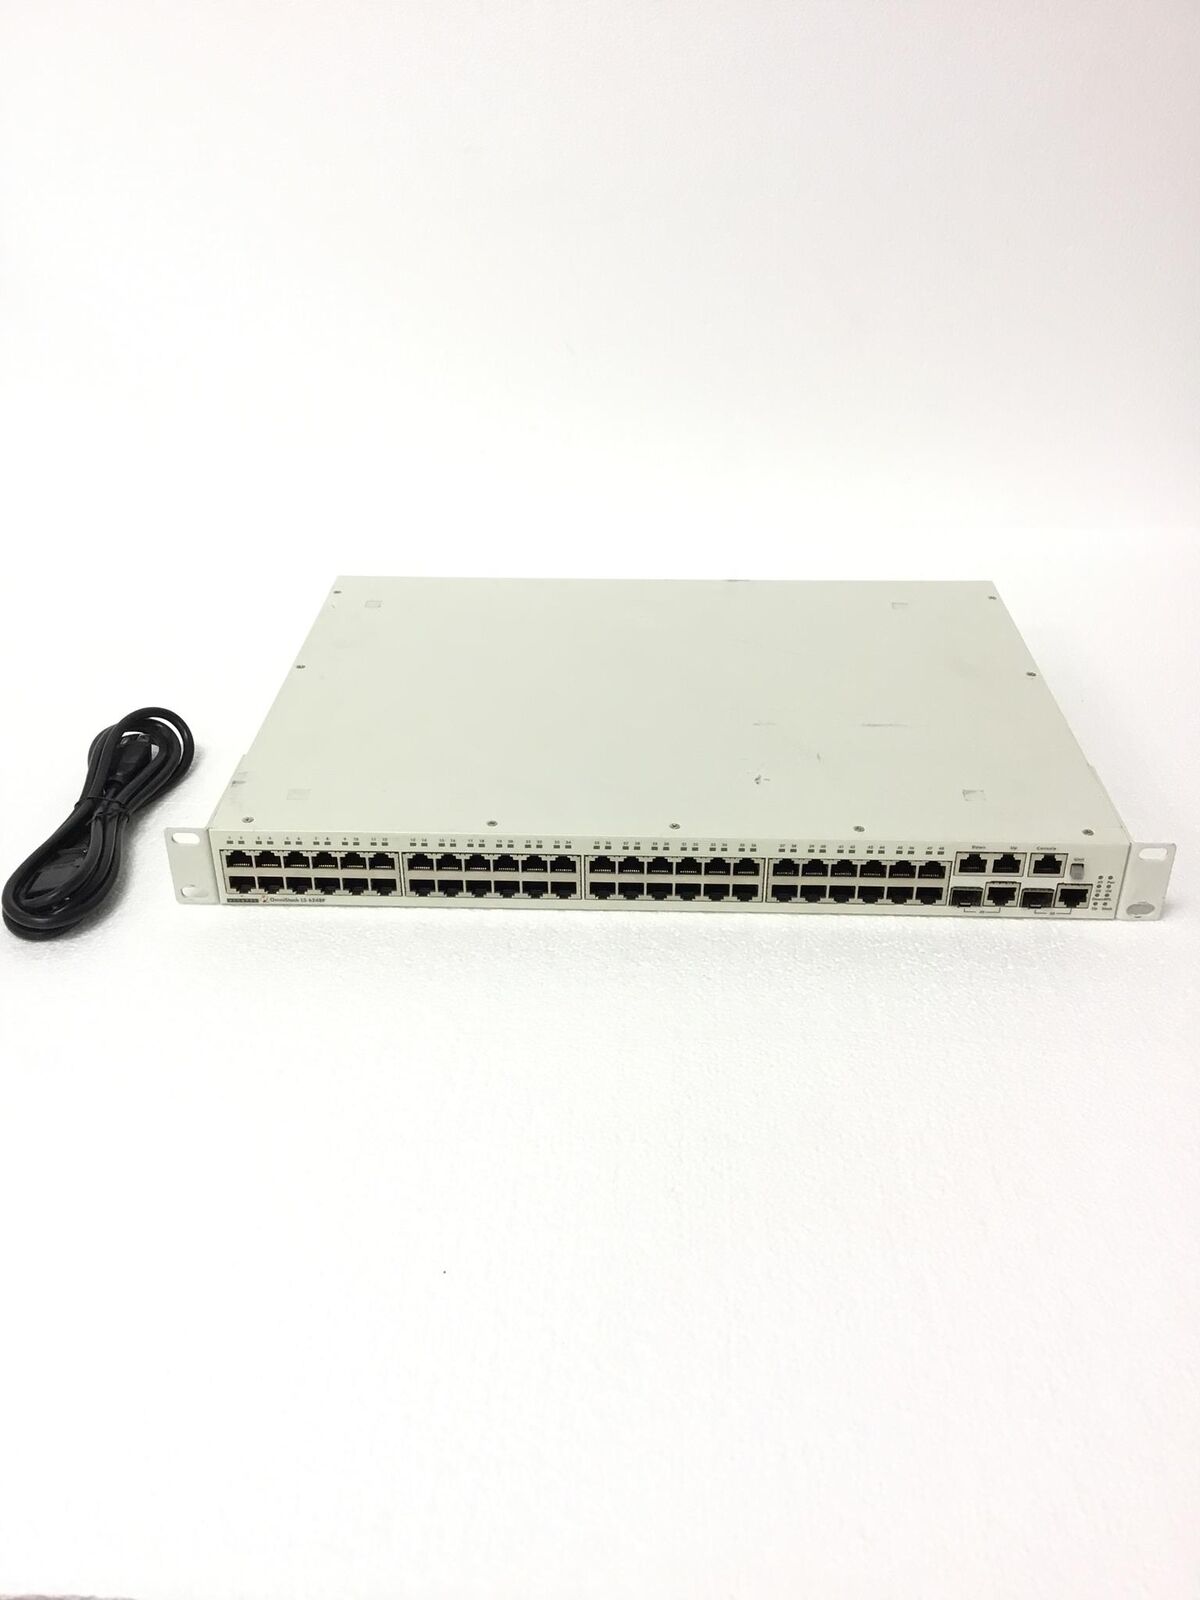 ALCATEL Omni Stack LS 6248P 48 Ports Network Switch with Rack Ears WORKING QTY